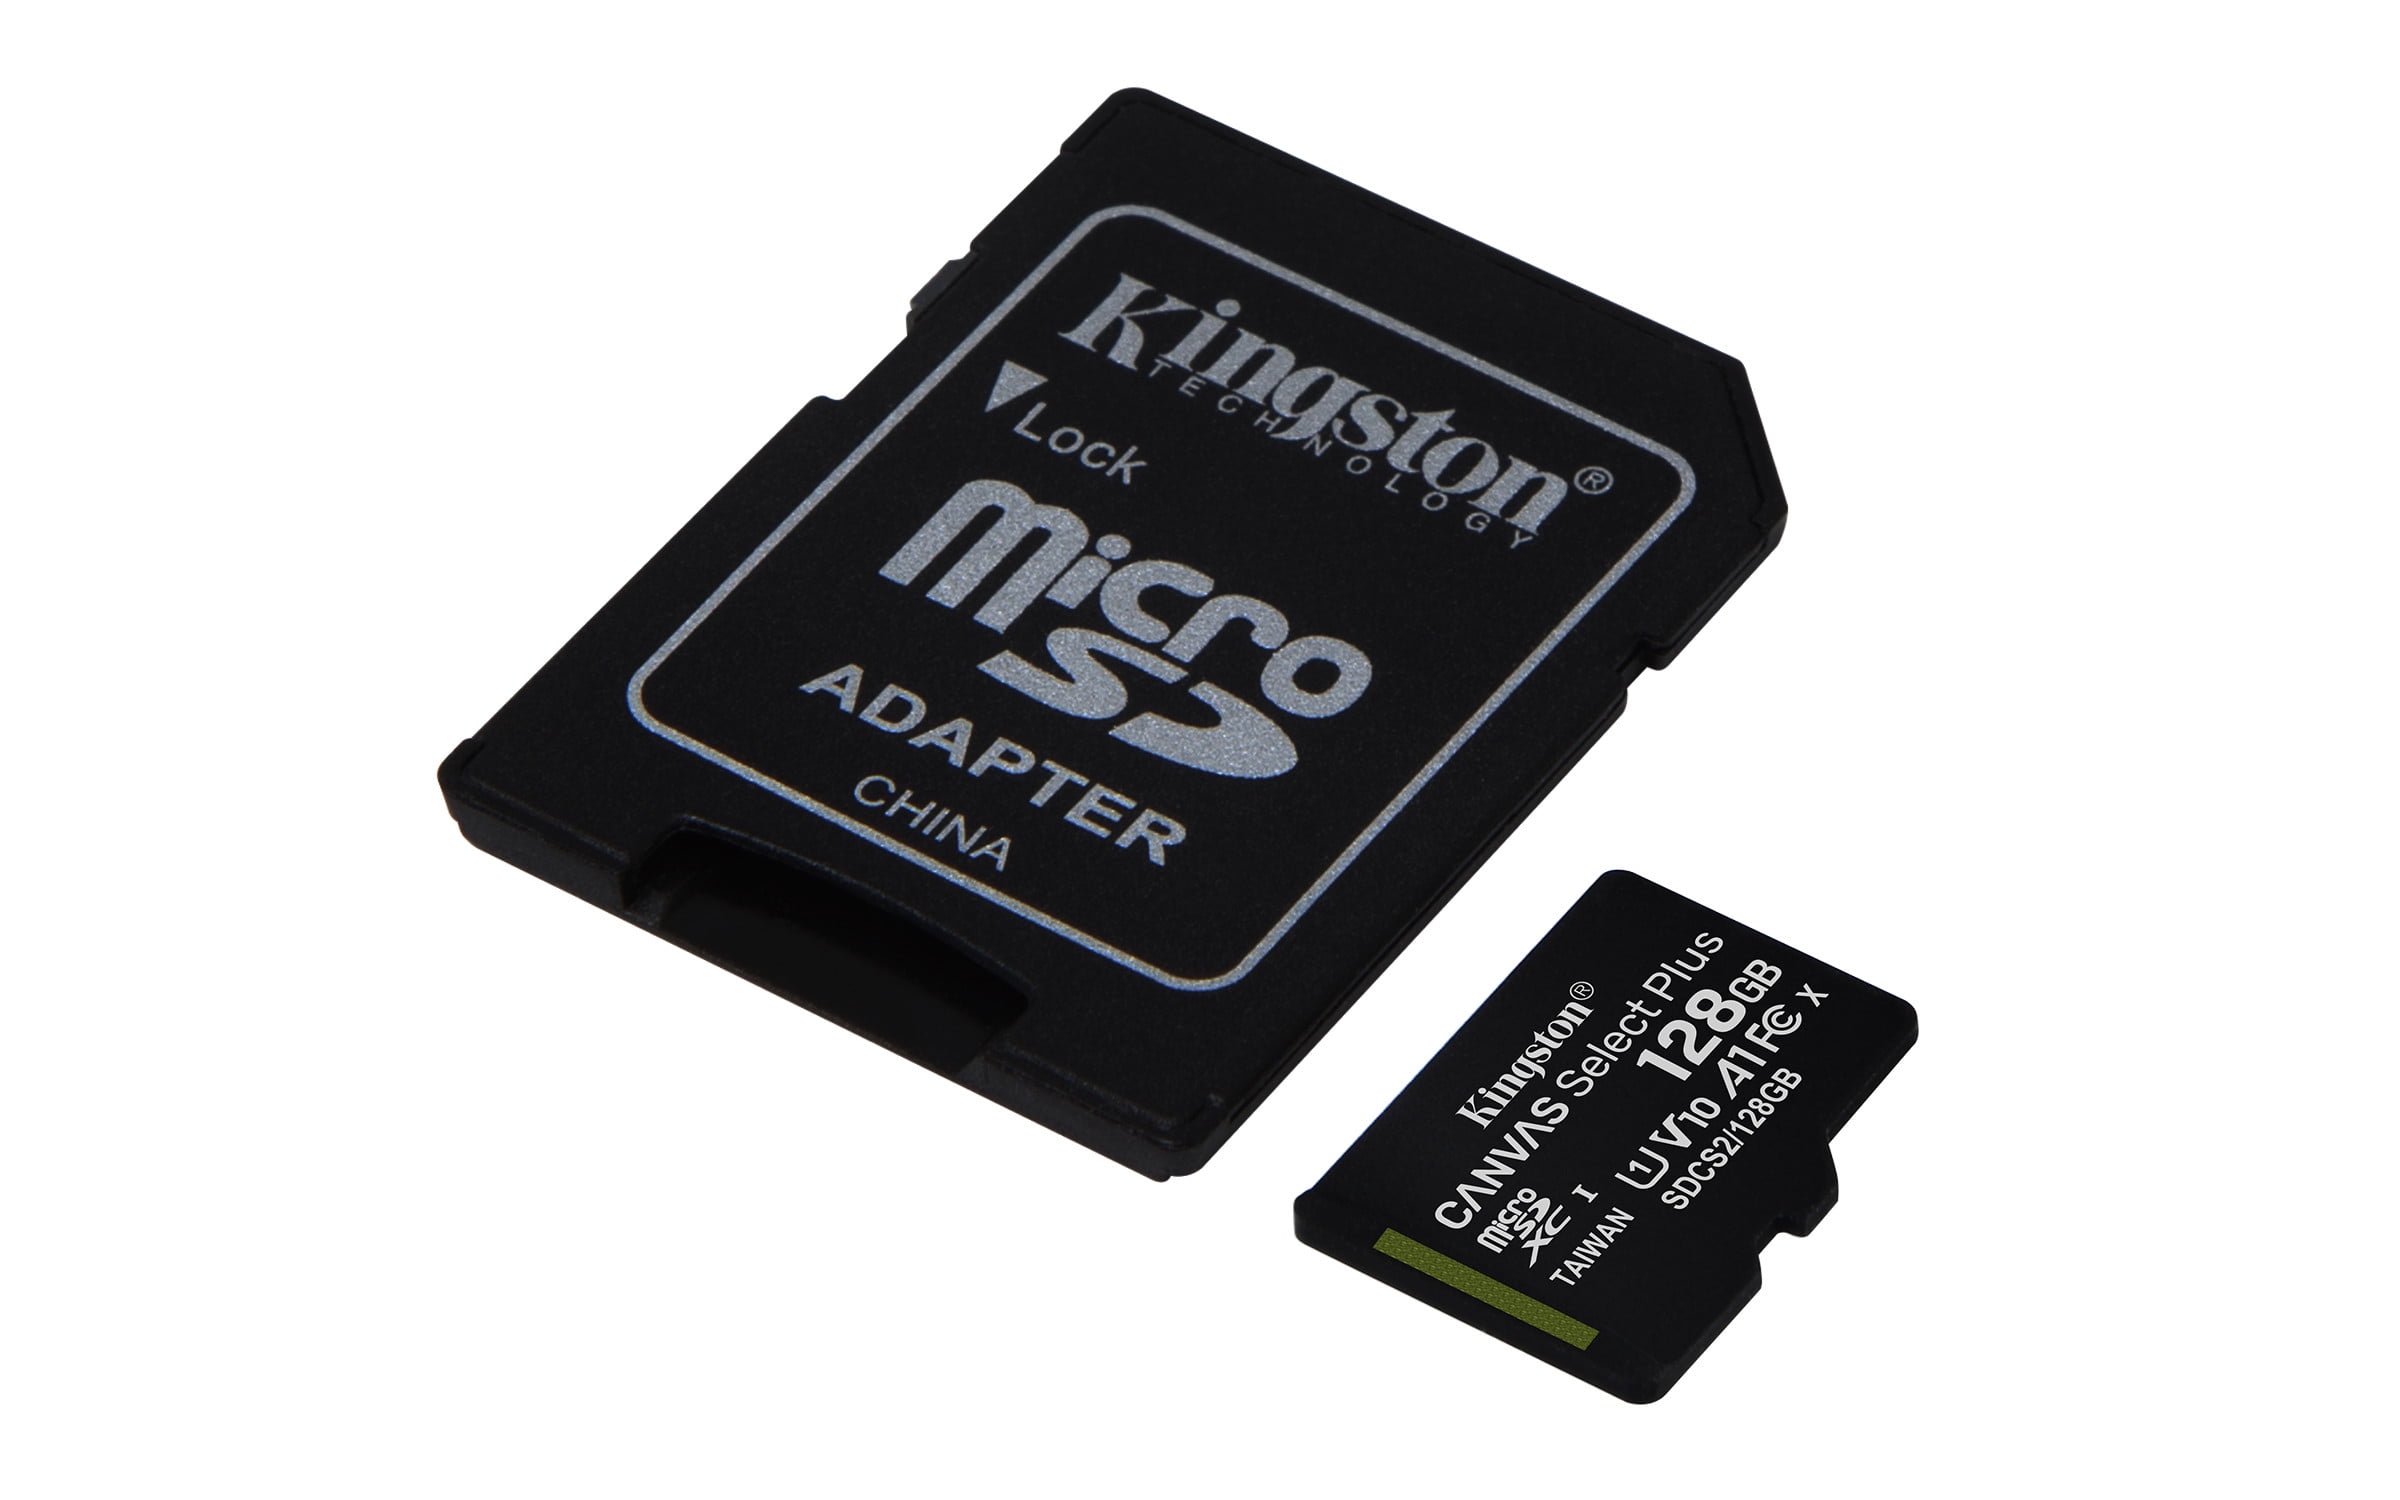 100MBs Works with Kingston Kingston 128GB Nokia 215 MicroSDXC Canvas Select Plus Card Verified by SanFlash. 